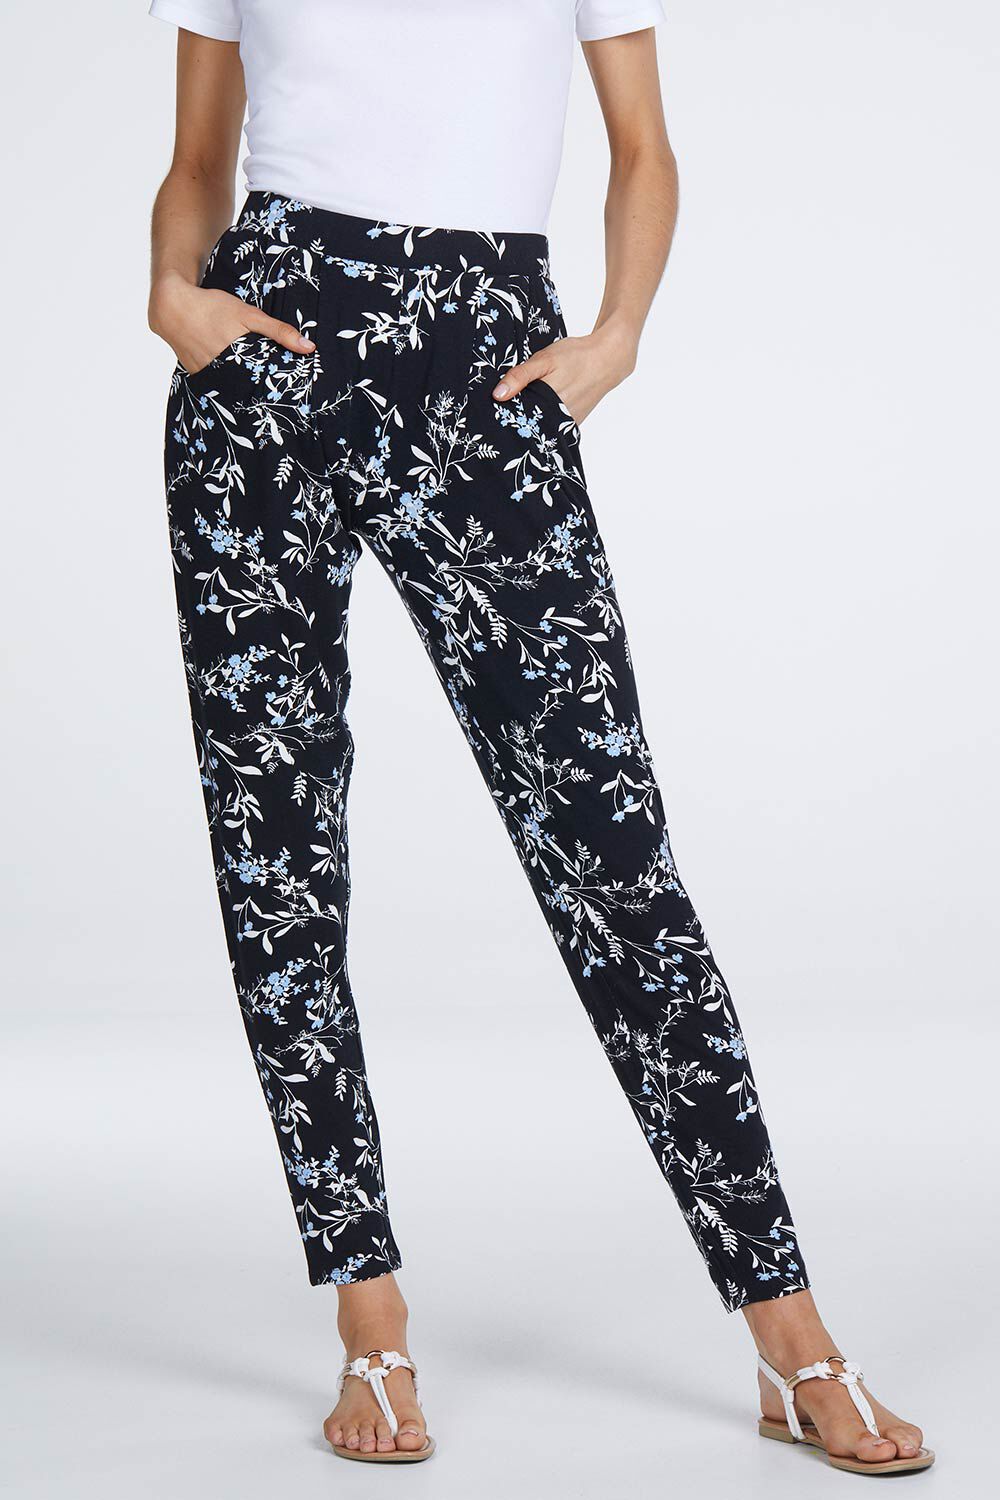 3 piece mother of the bride pantsuit